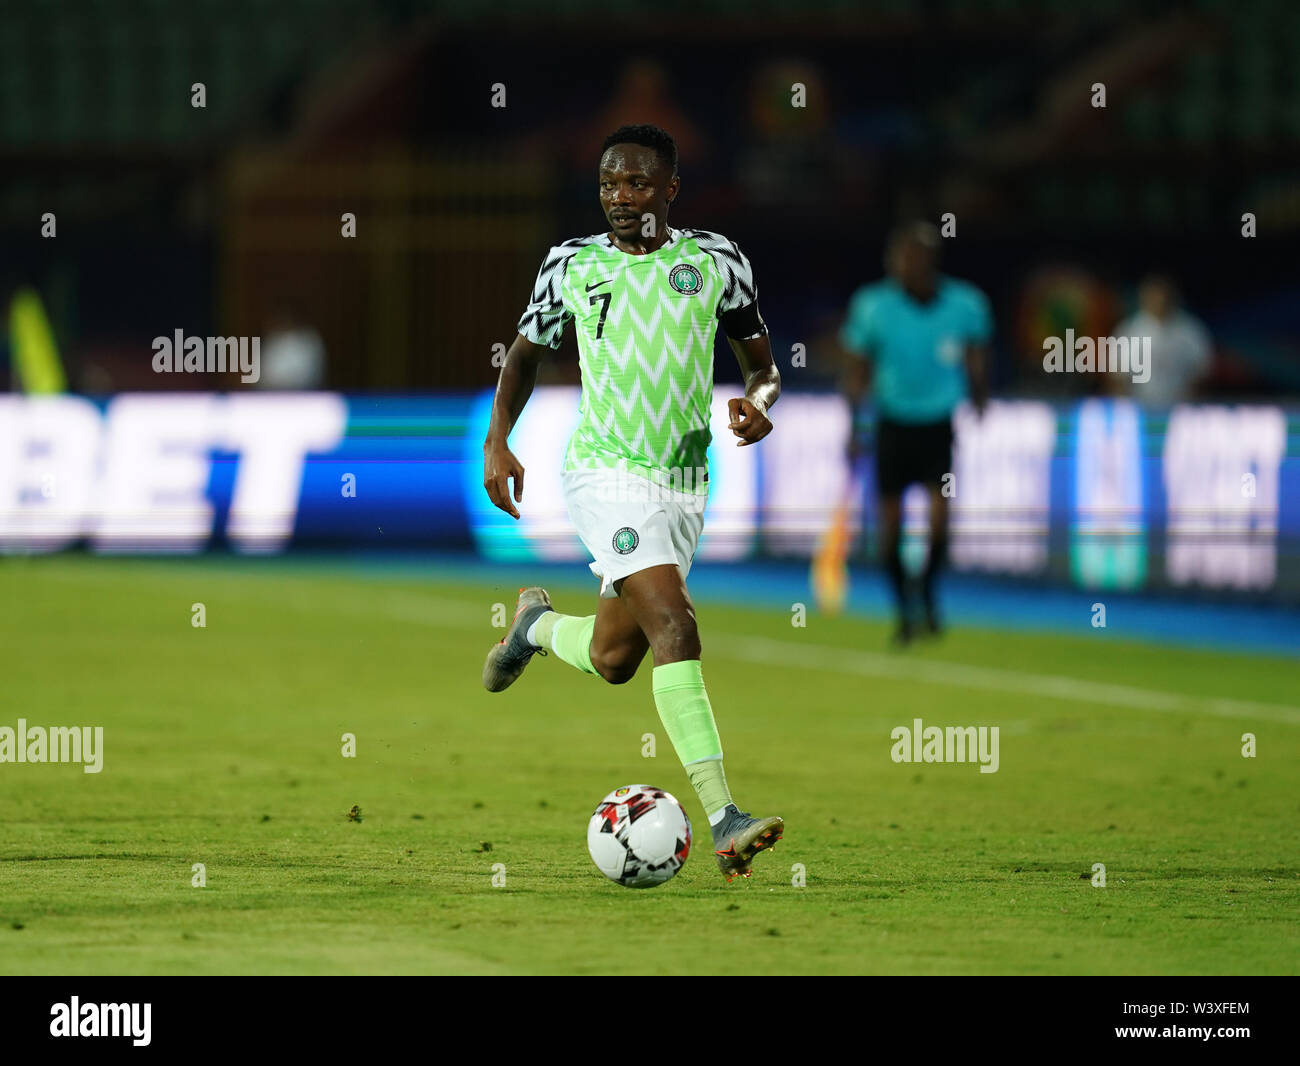 Cairo, Tunisia, Egypt. 17th July, 2019. FRANCE OUT July 17, 2019: Ahmed Musa of Nigeria during the 2019 African Cup of Nations match between Tunisia and Nigeria at the Al Salam Stadium in Cairo, Egypt. Ulrik Pedersen/CSM/Alamy Live News Stock Photo